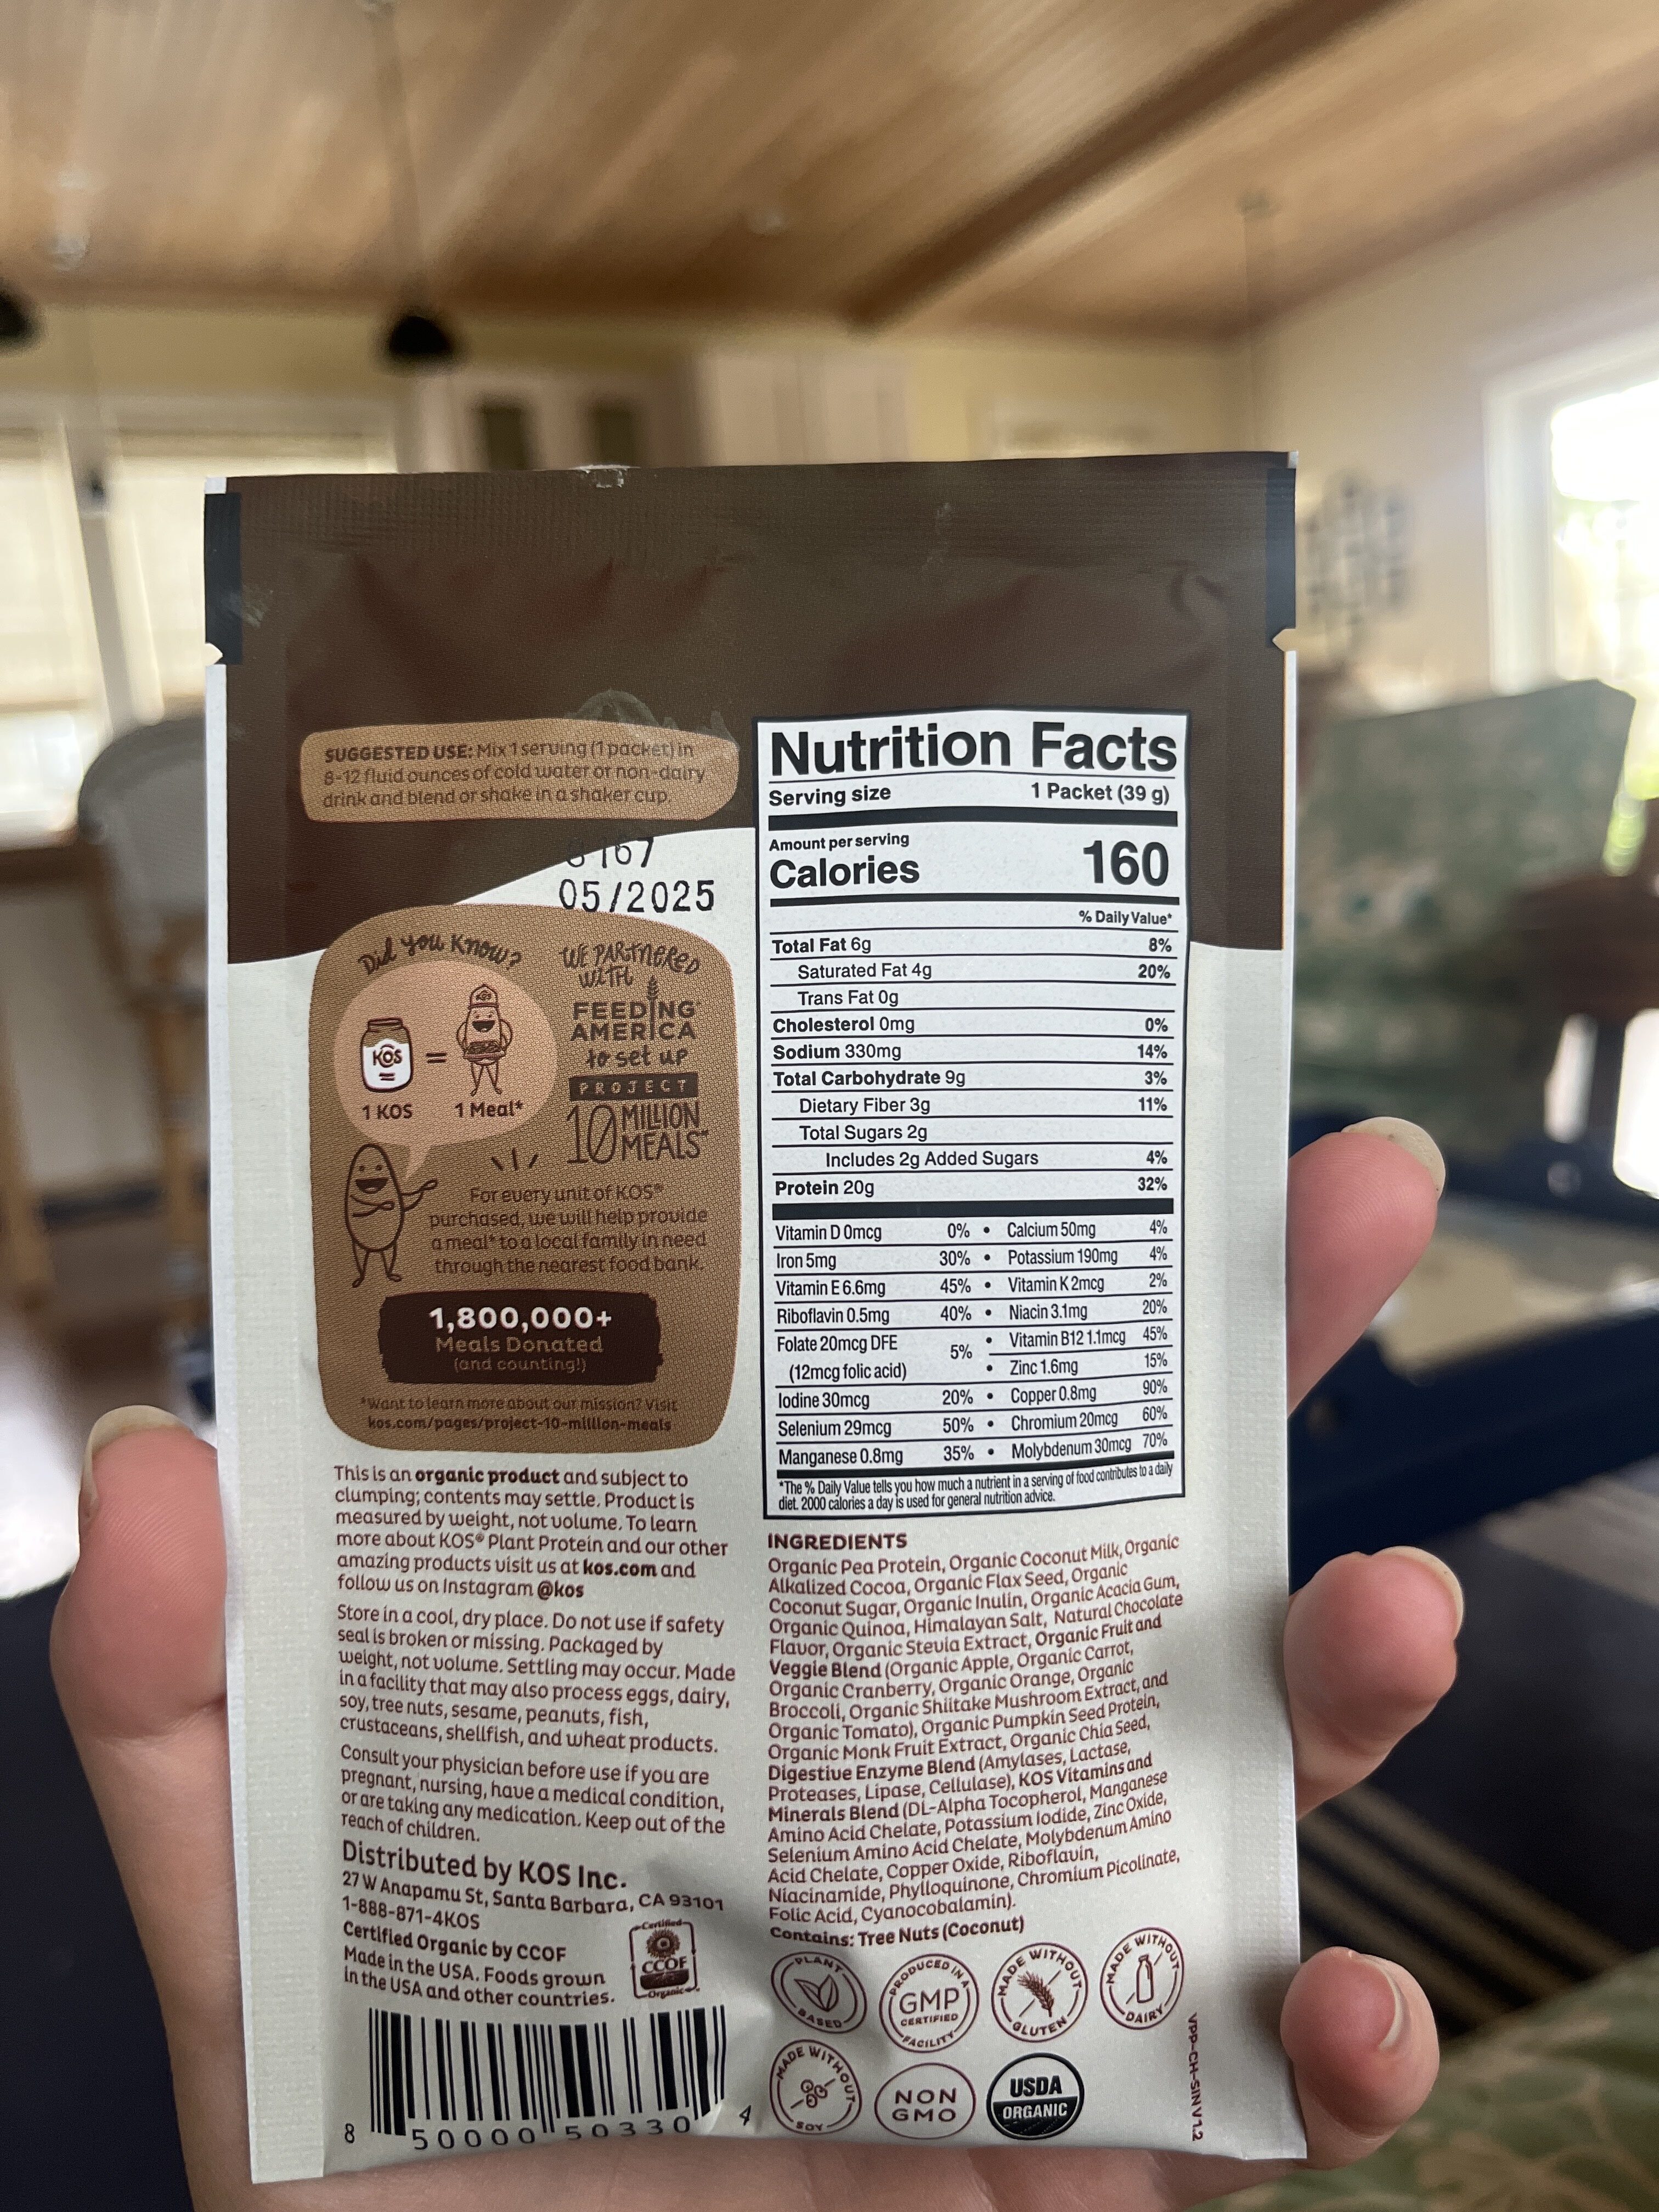 KOS PROTEIN - Recycling instructions and/or packaging information